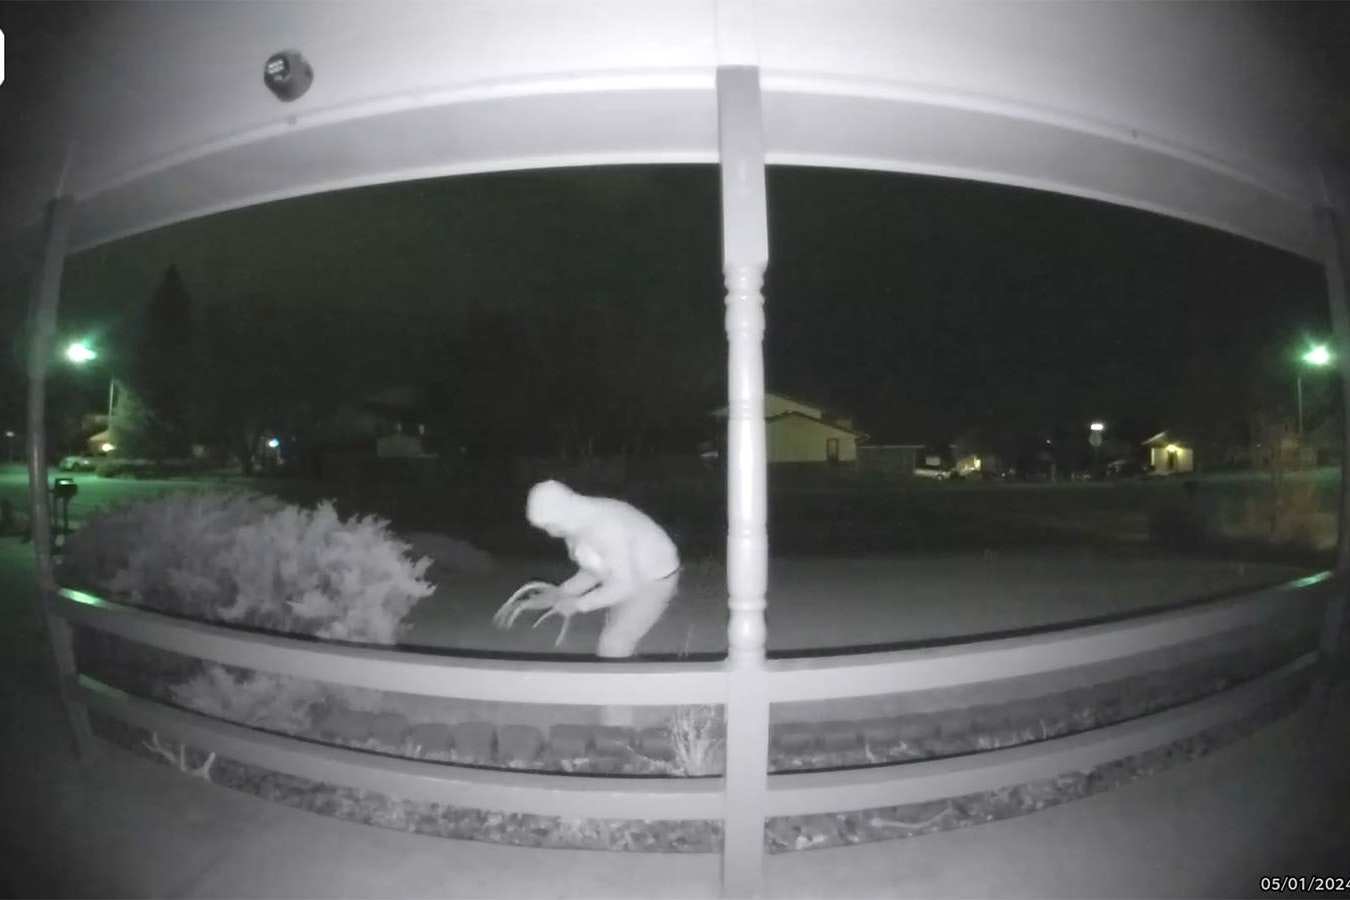 The Ring doorbell camera of a Casper home caught an antler theif at about 4 a.m. Wednesday stealing all the shed antlers in the home's landscaping.